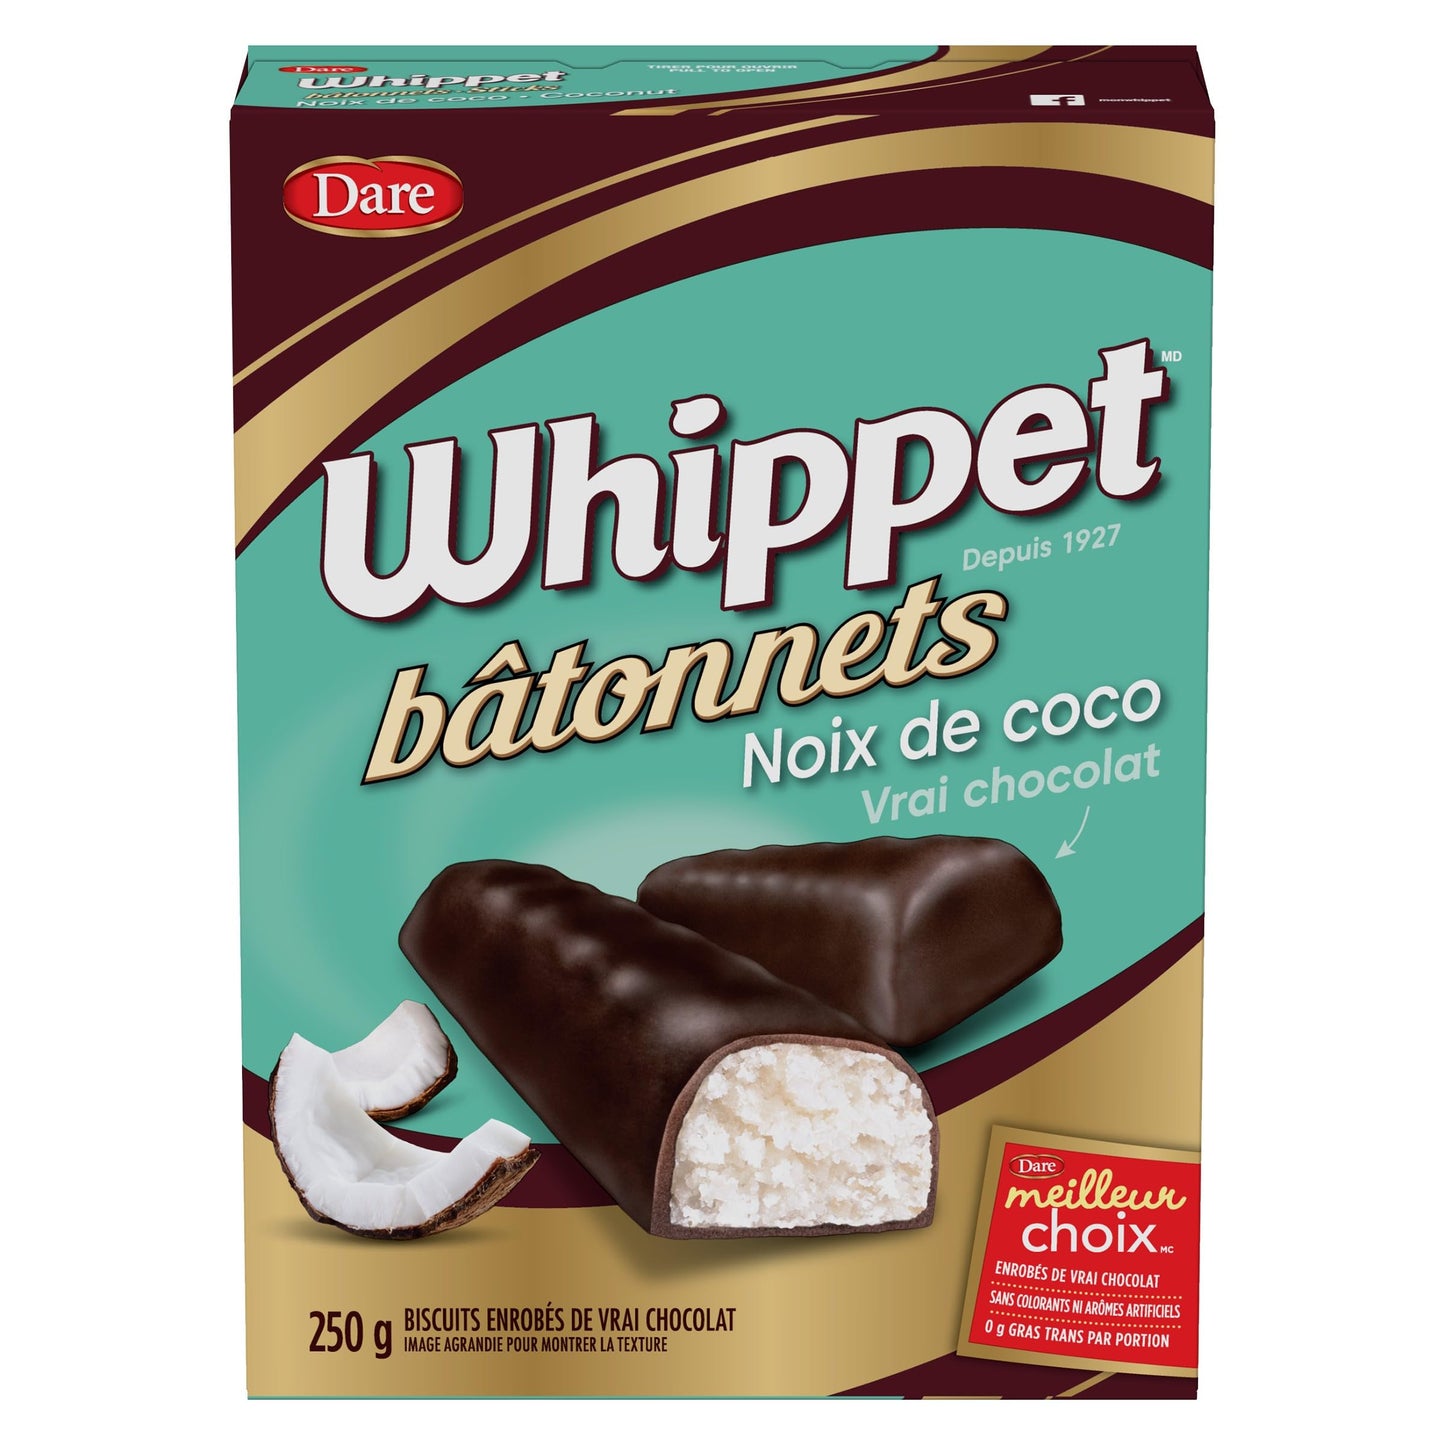 Dare Whippet Sticks Chocolate covered Coconut Sticks 250g/8.8oz (Shipped from Canada)